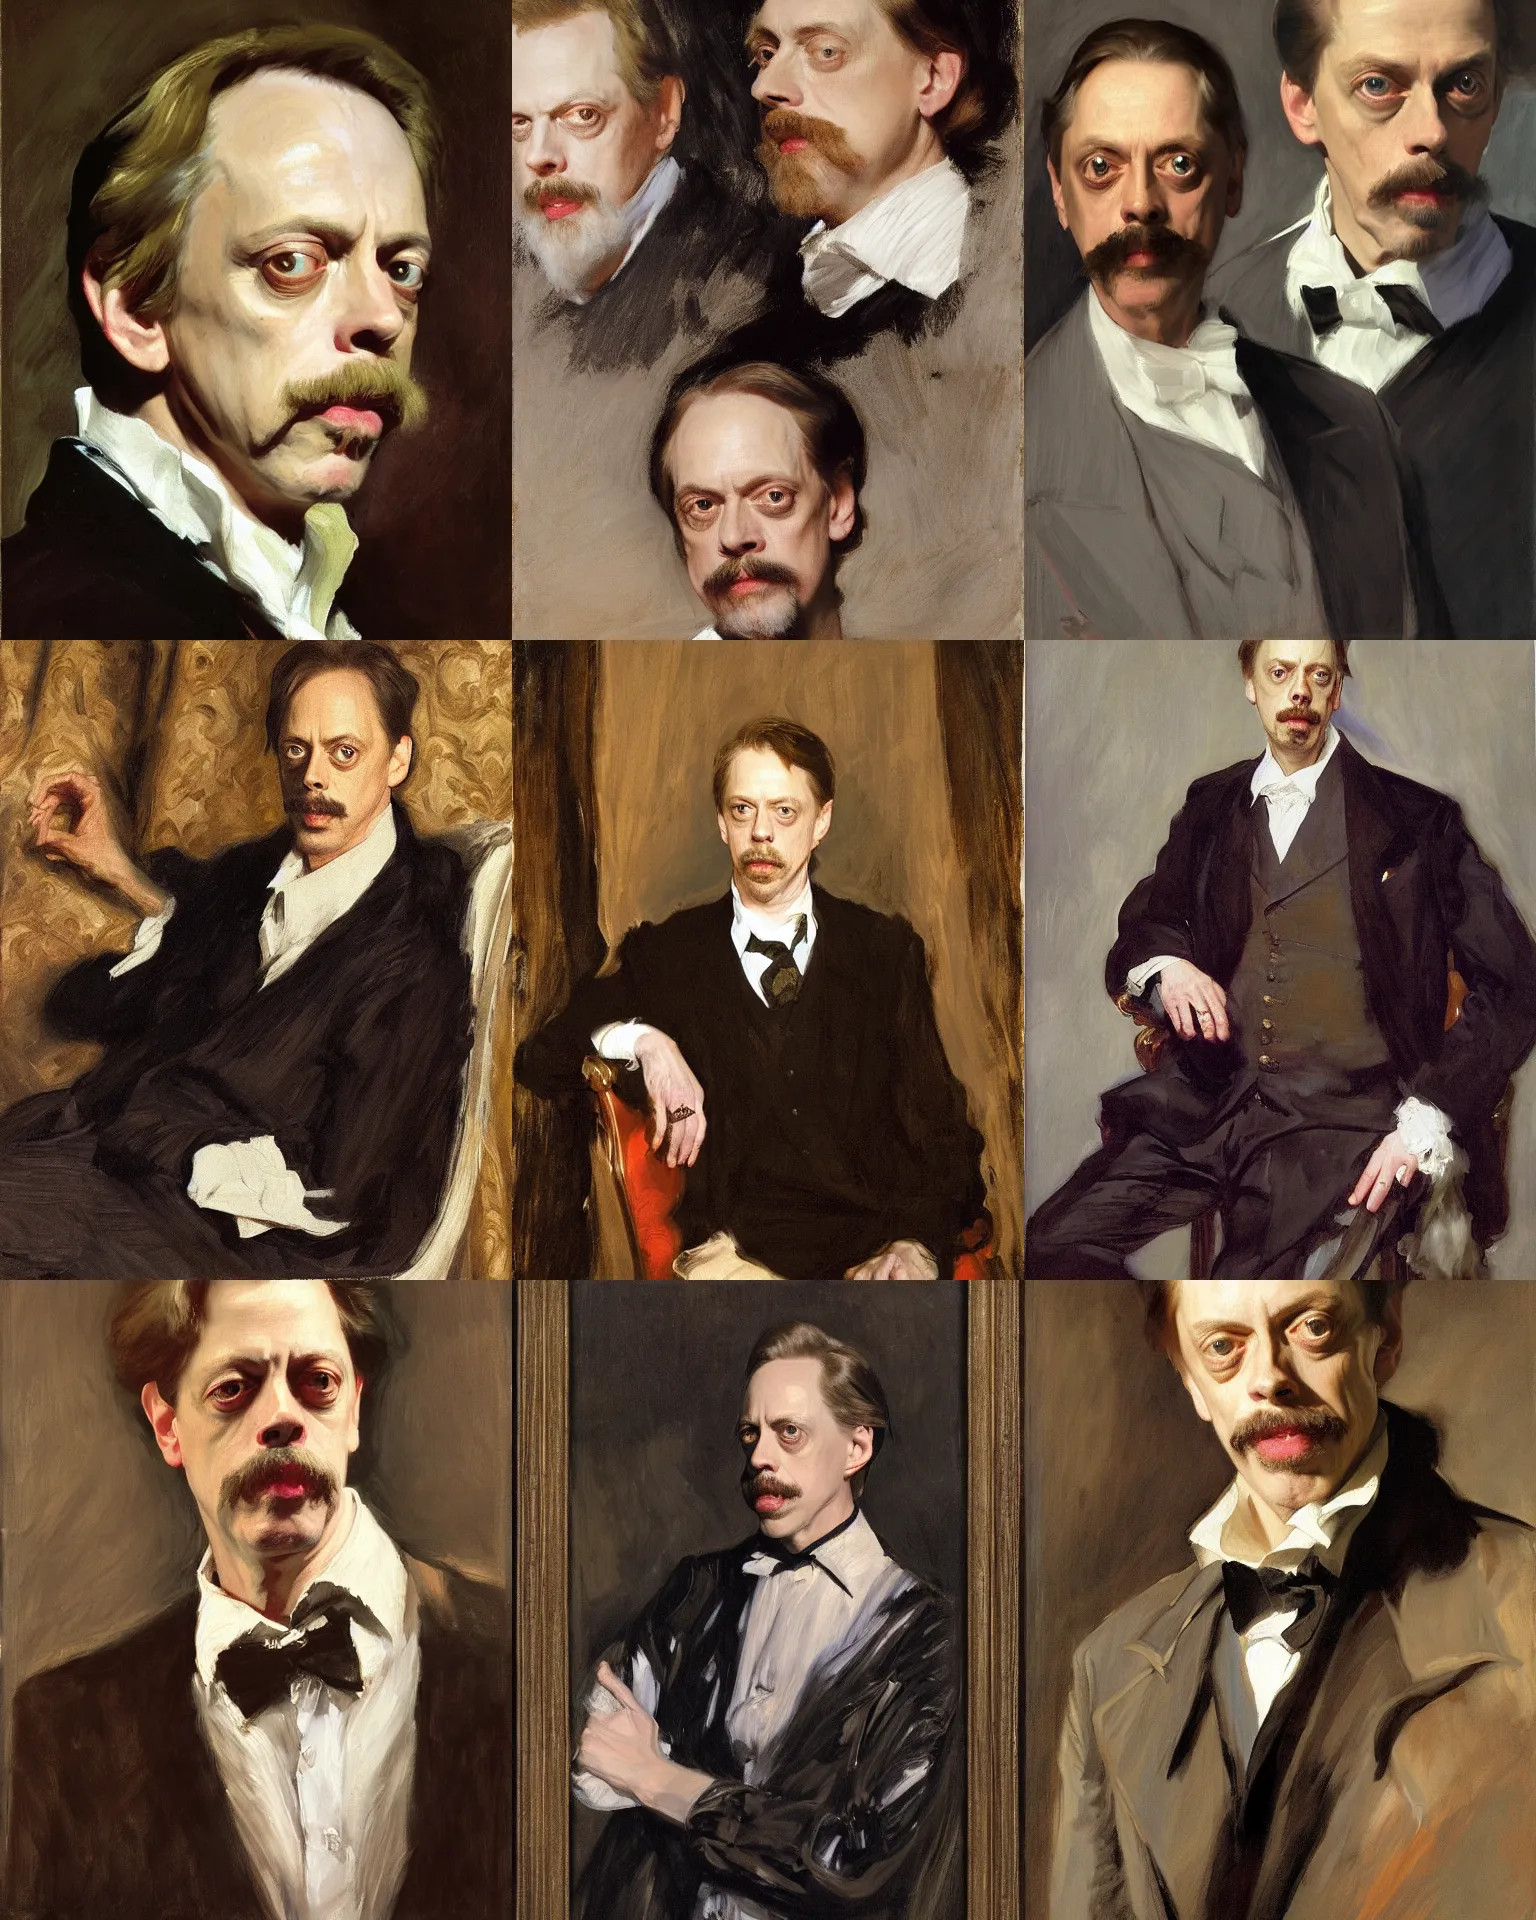 Prompt: A portrait of Steve Buscemi, painted by John Singer Sargent, by Anthony Van Dyck, by J.C. Leyendecker, loish, Chuck Close